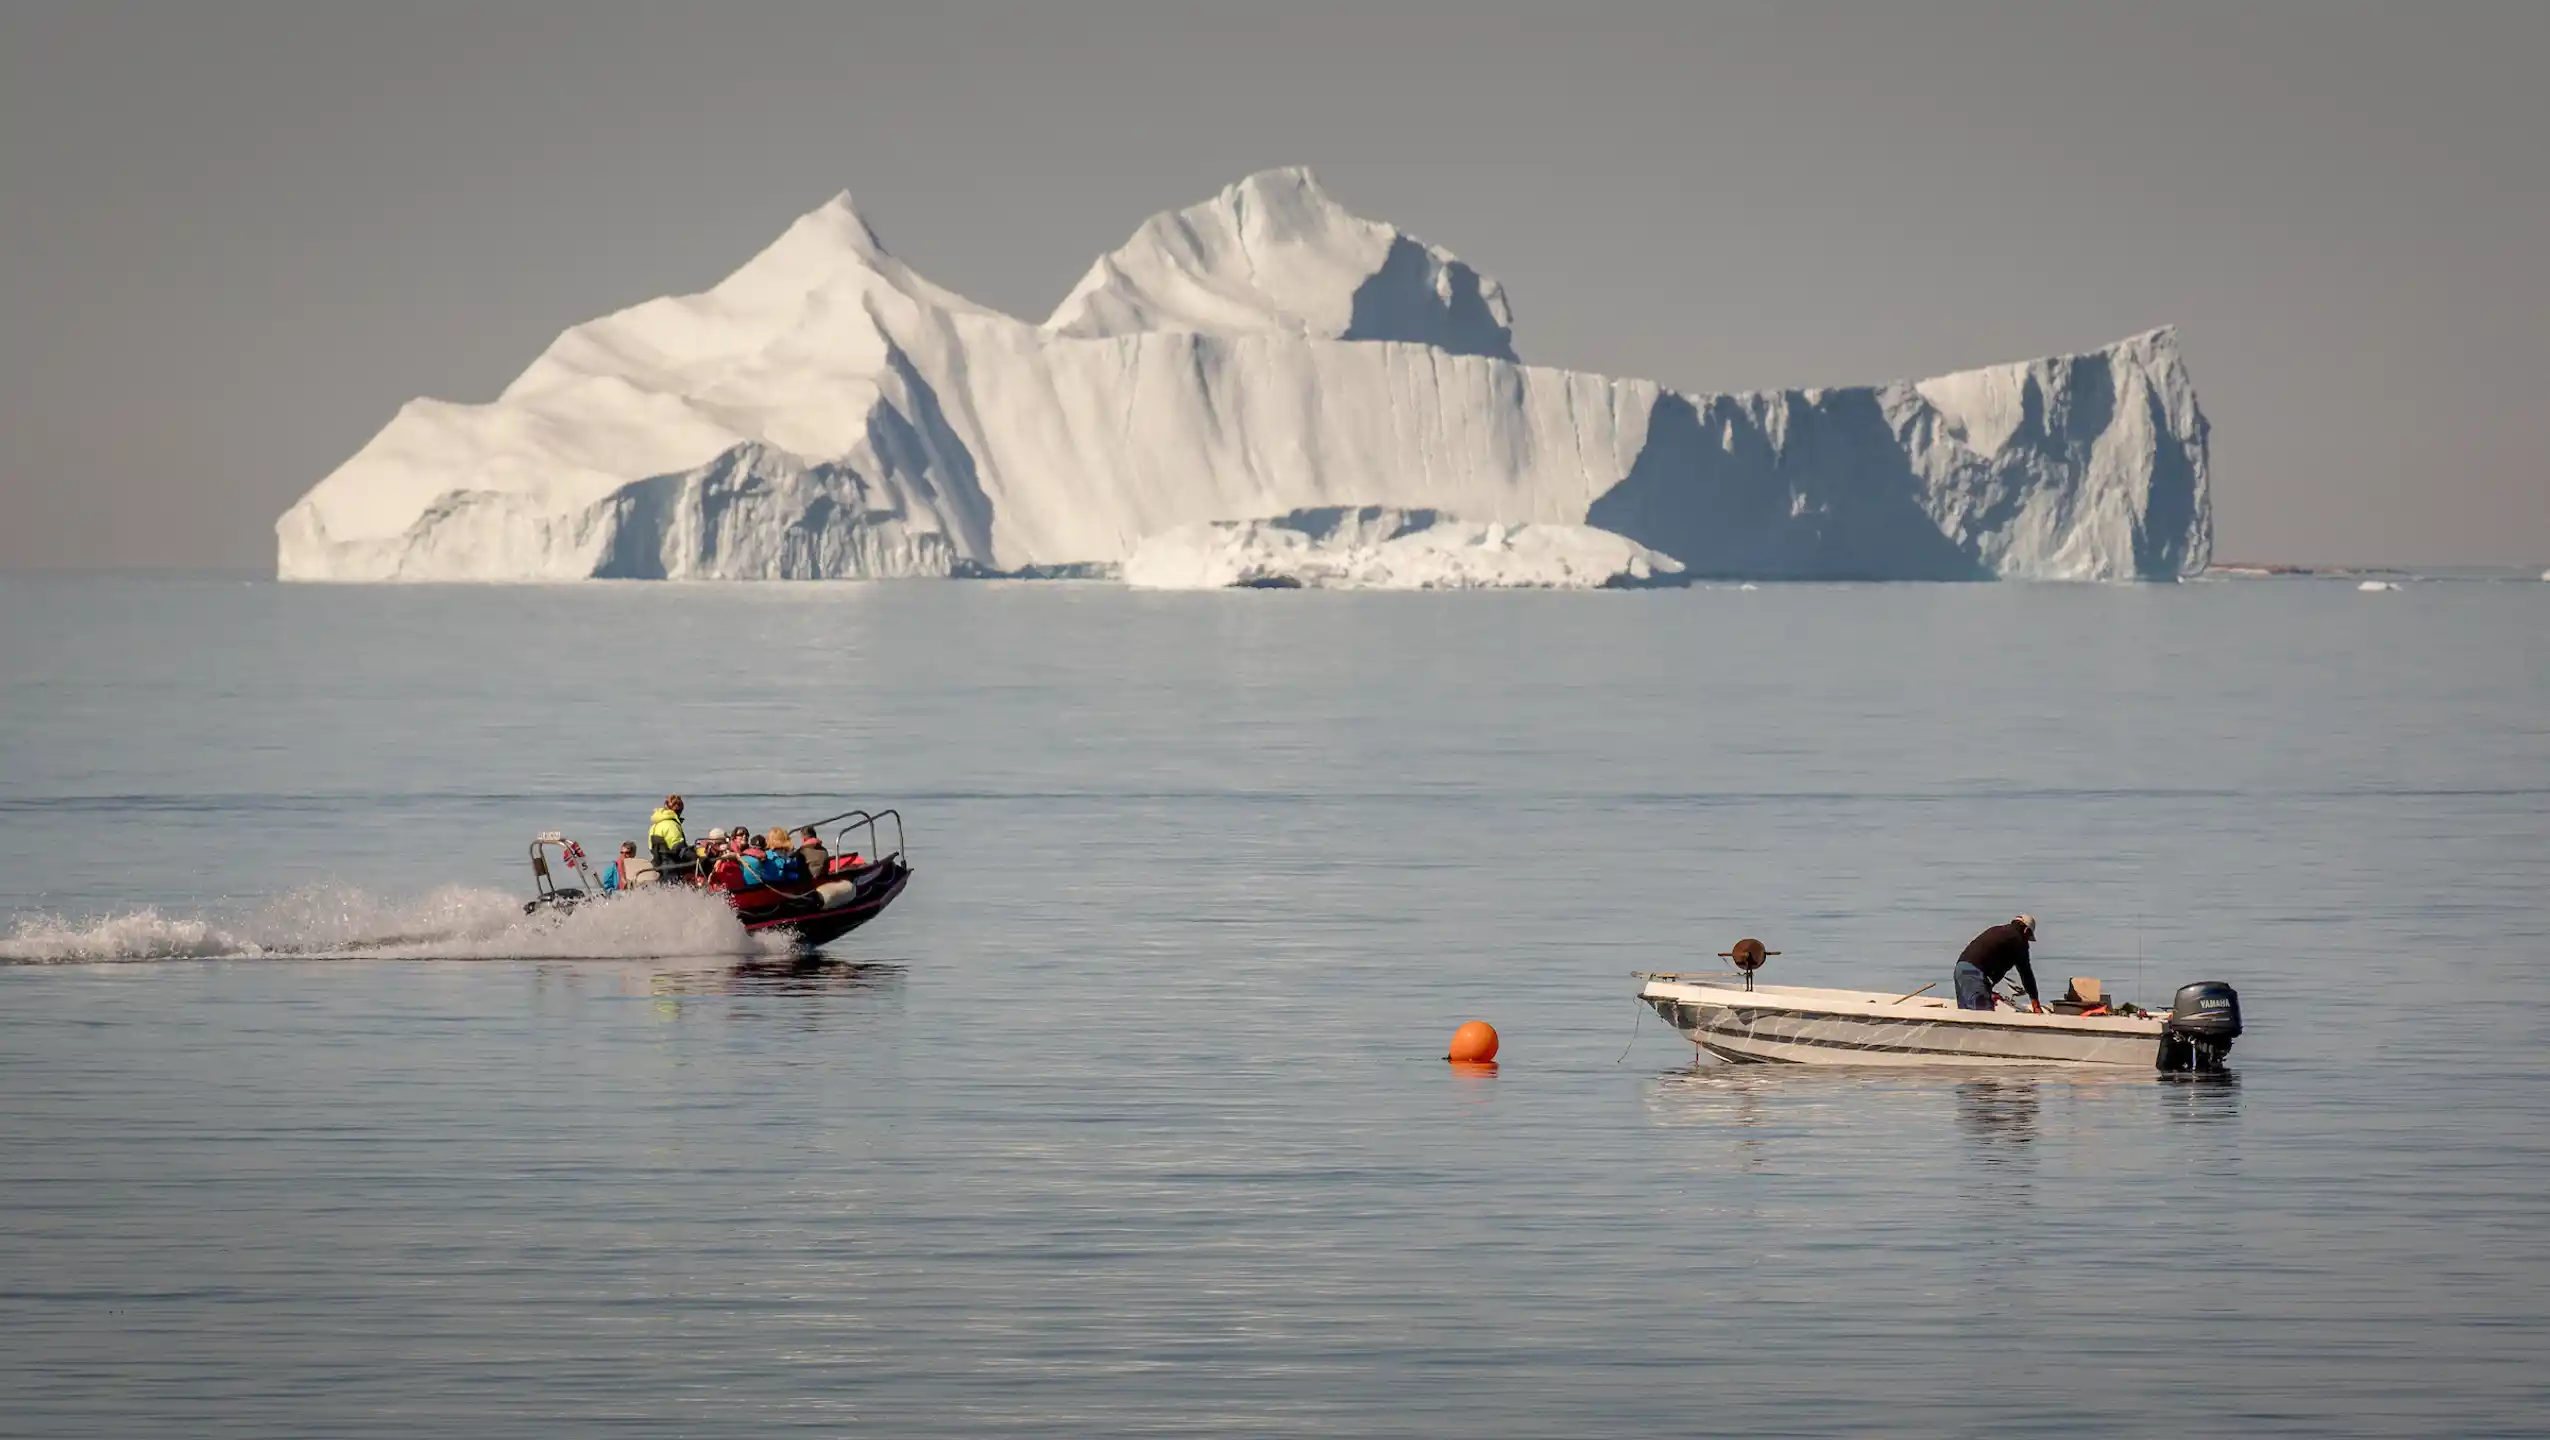 A Tenderboat From MS Fram Going Past A Fisherman At Work In Upernavik In Greenland